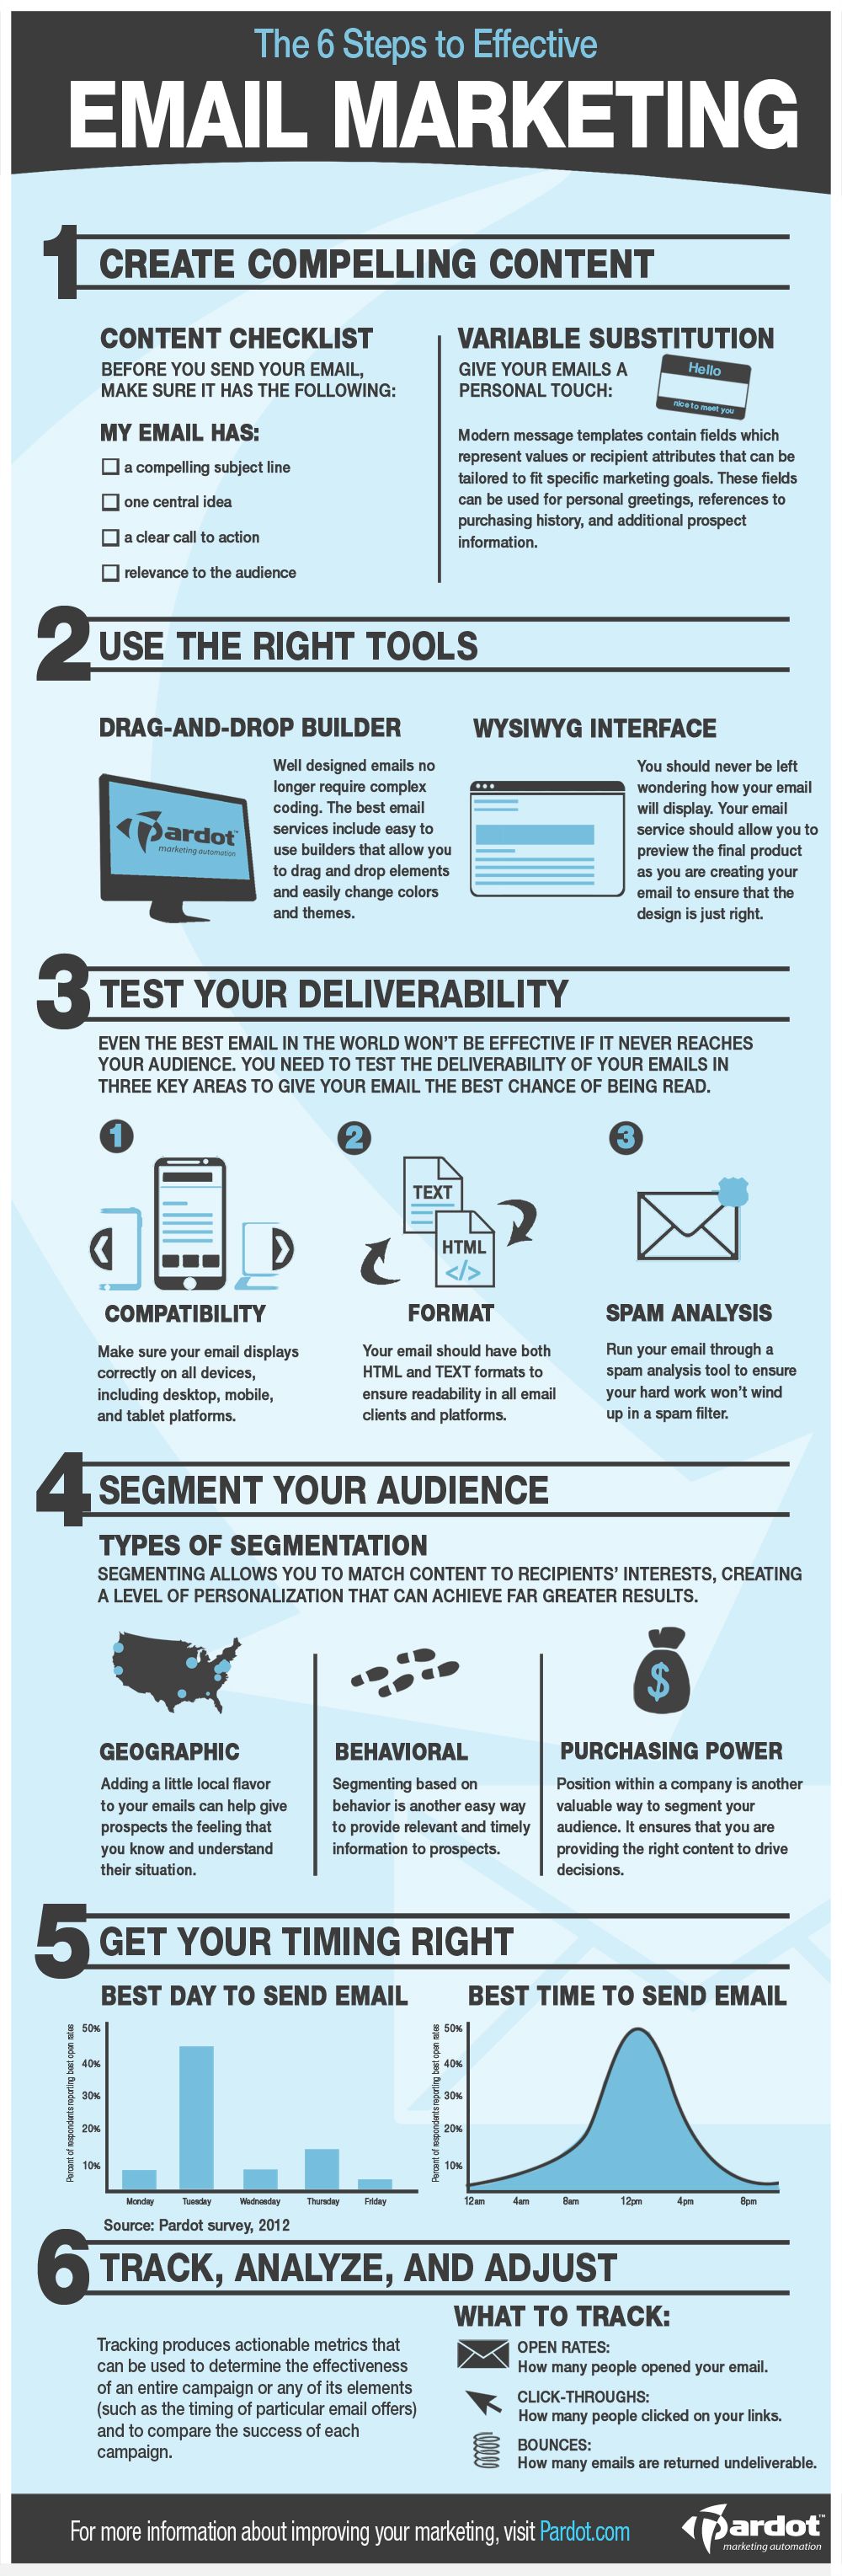 6 Steps to Effective Email Marketing